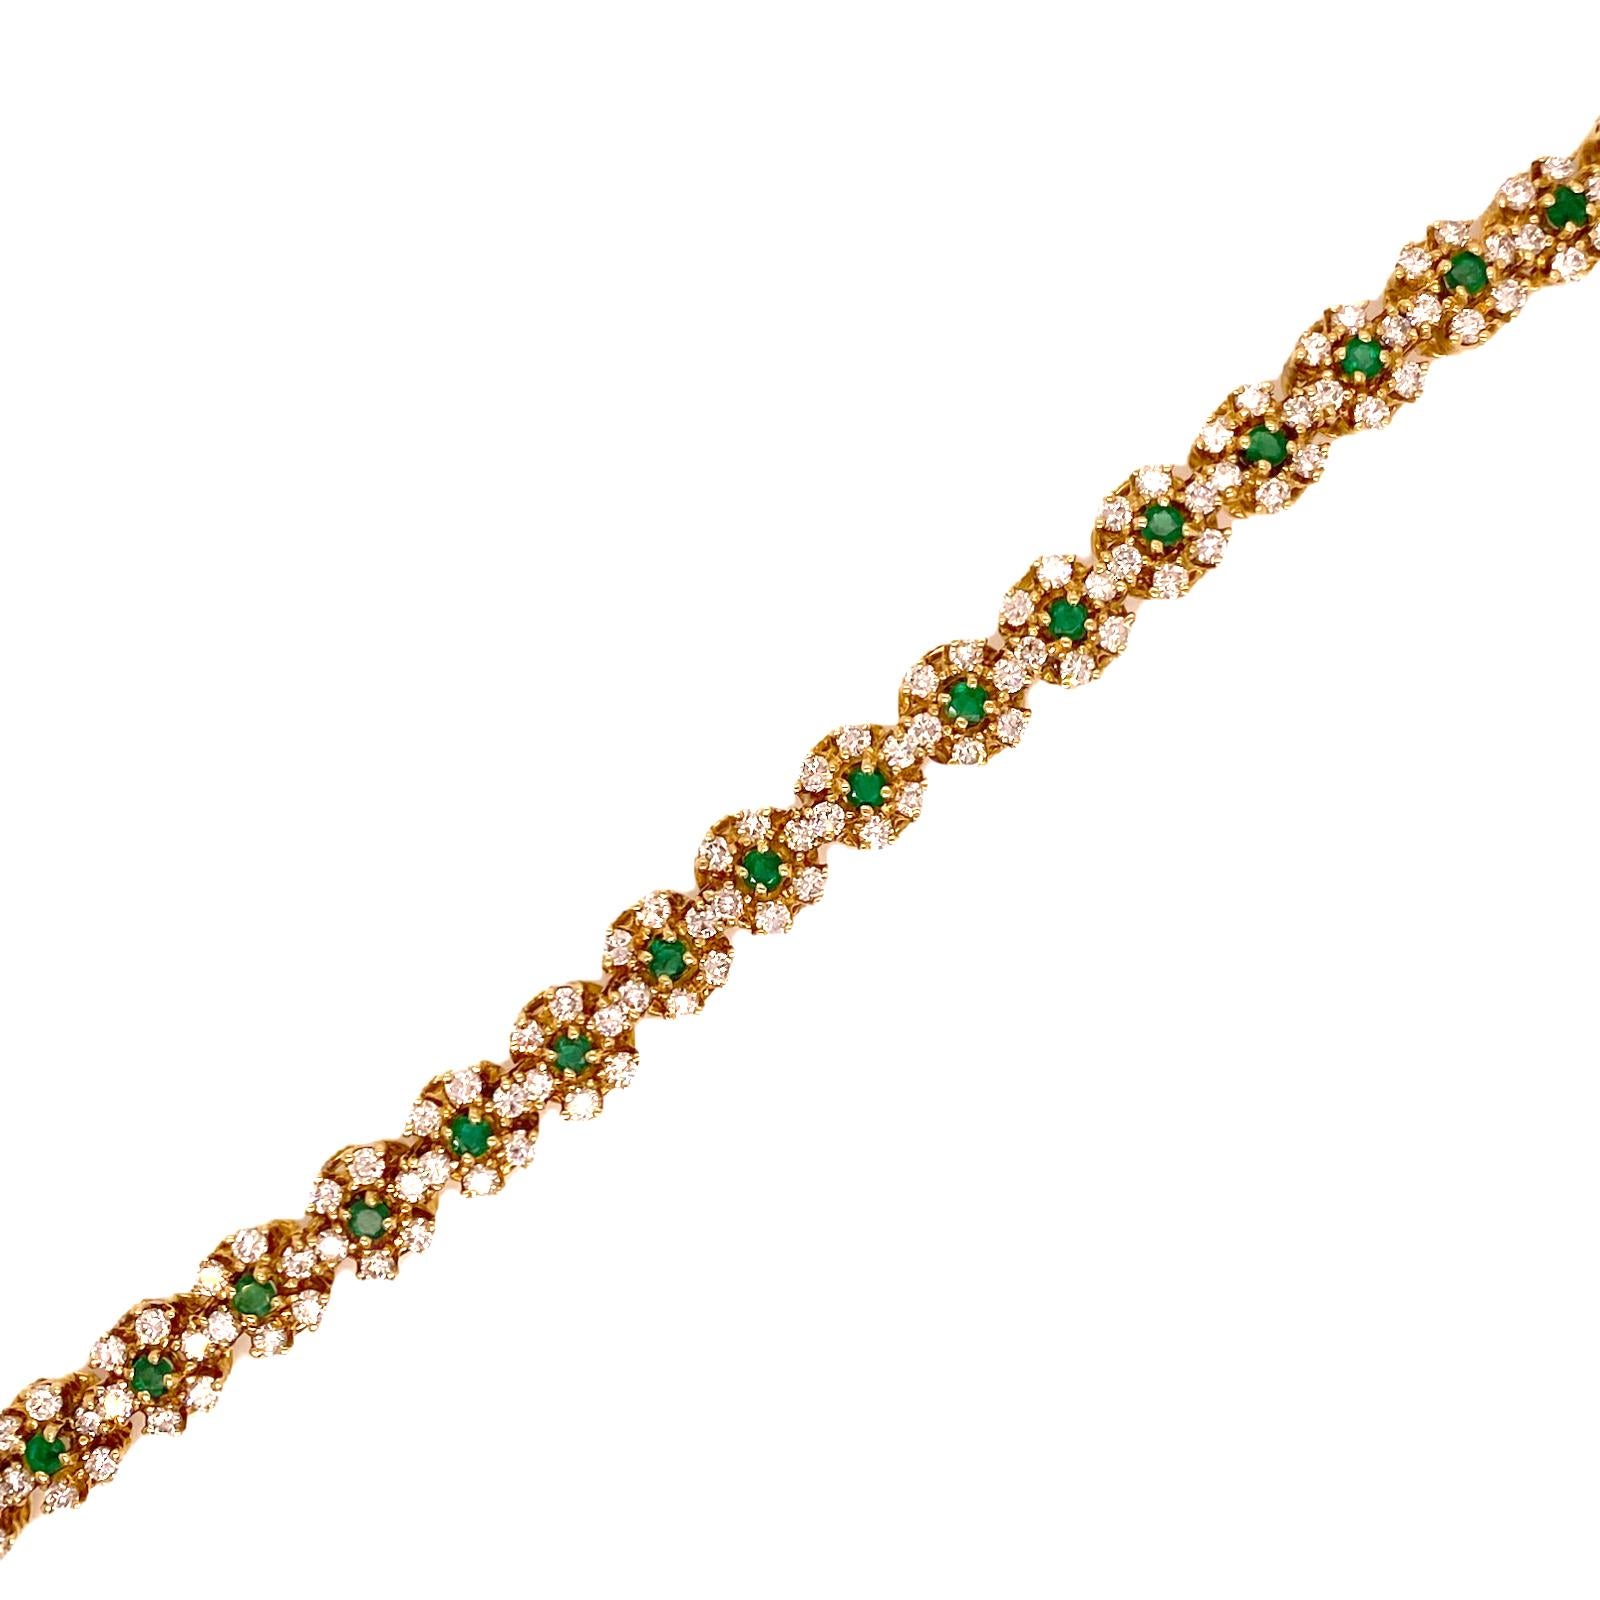 Gorgeous emerald and diamond bracelet fashioned in 18 karat yellow gold. The 23 green emeralds weigh 1.50 carat total weight and are surrounded by 135 round brilliant cut diamonds weighing 5.00 carat total weight. The diamonds are graded F-G color